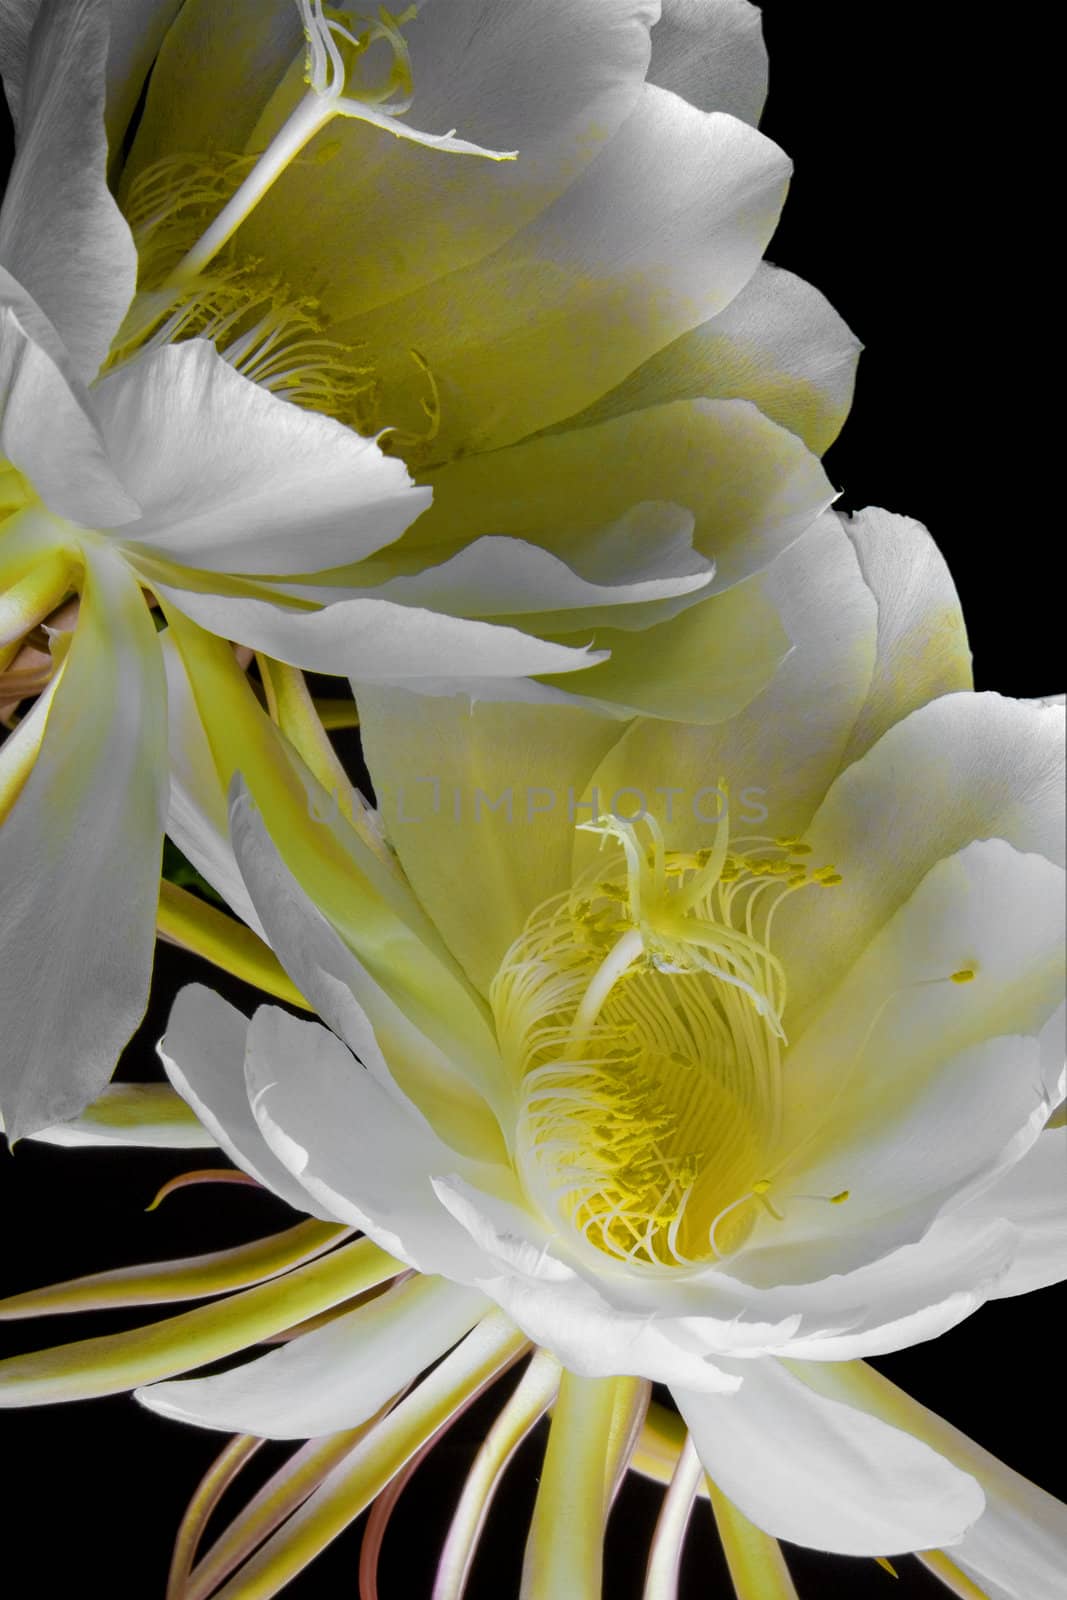 Night Blooming Cereus, 'Queen of the Night' by hotflash2001